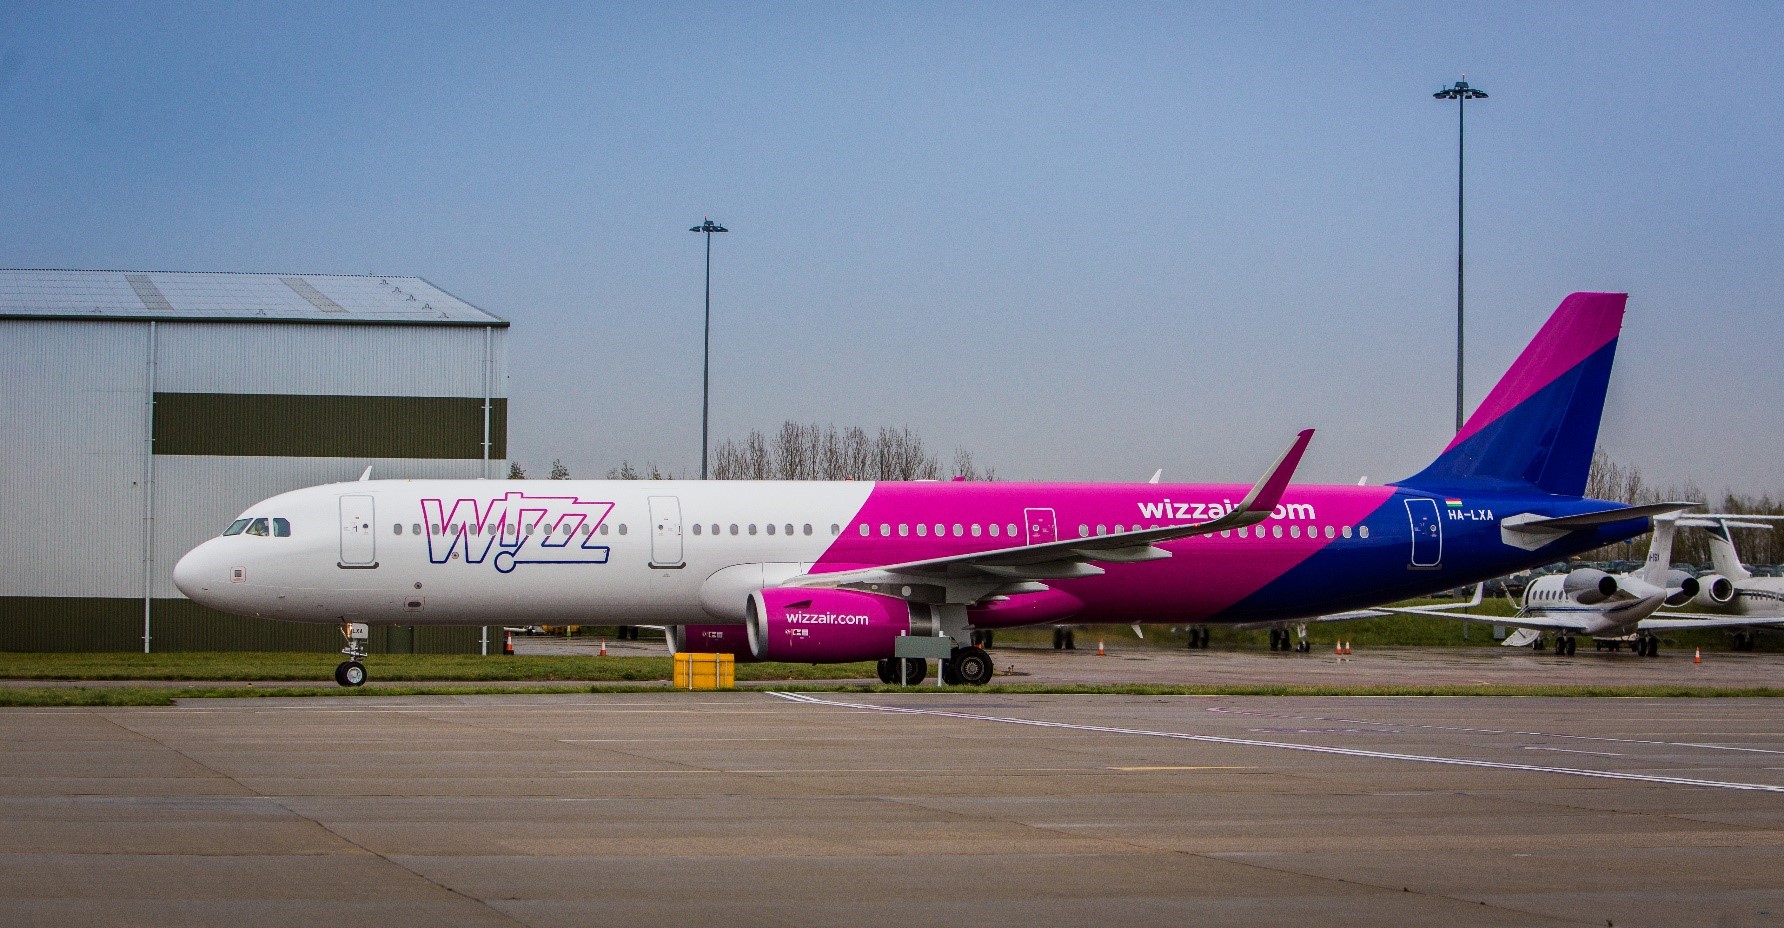 WIZZ AIR DOUBLE-DIGIT ROUTE ANNOUNCEMENT FROM KEFLAVIK